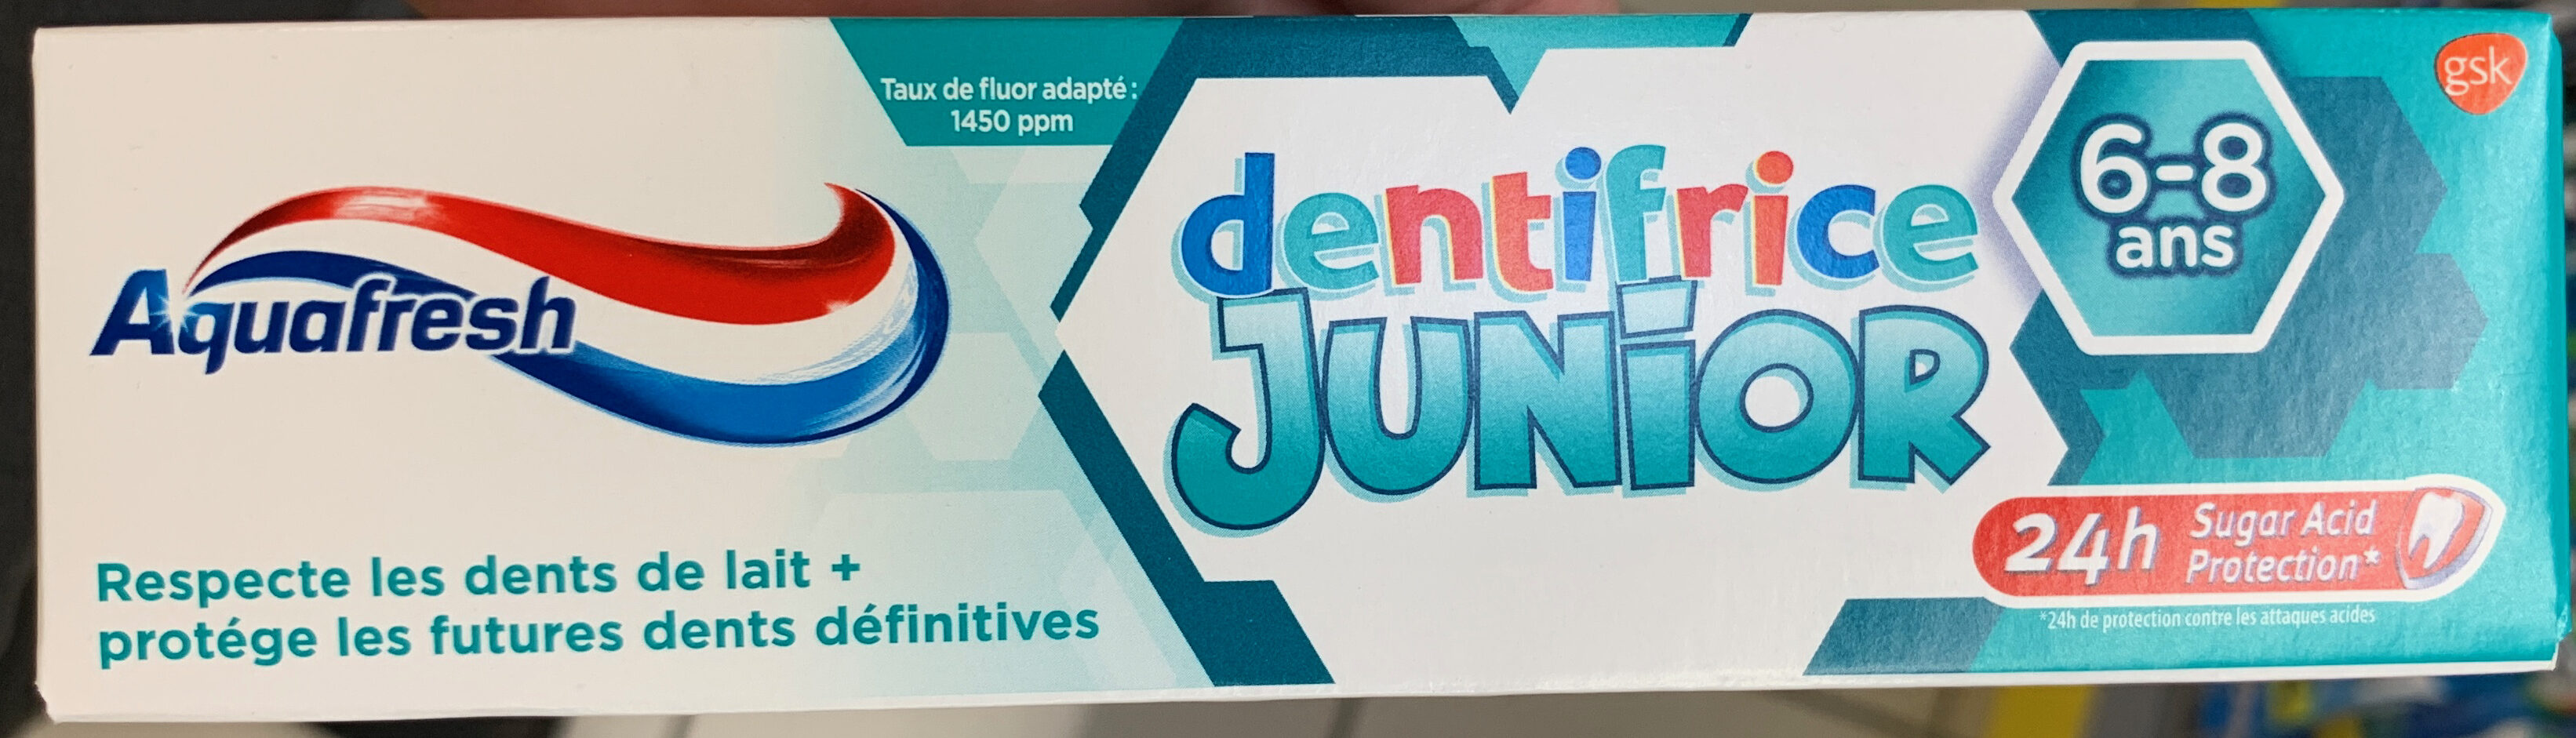 Dentifrice Junior 6-8 ans - Product - fr